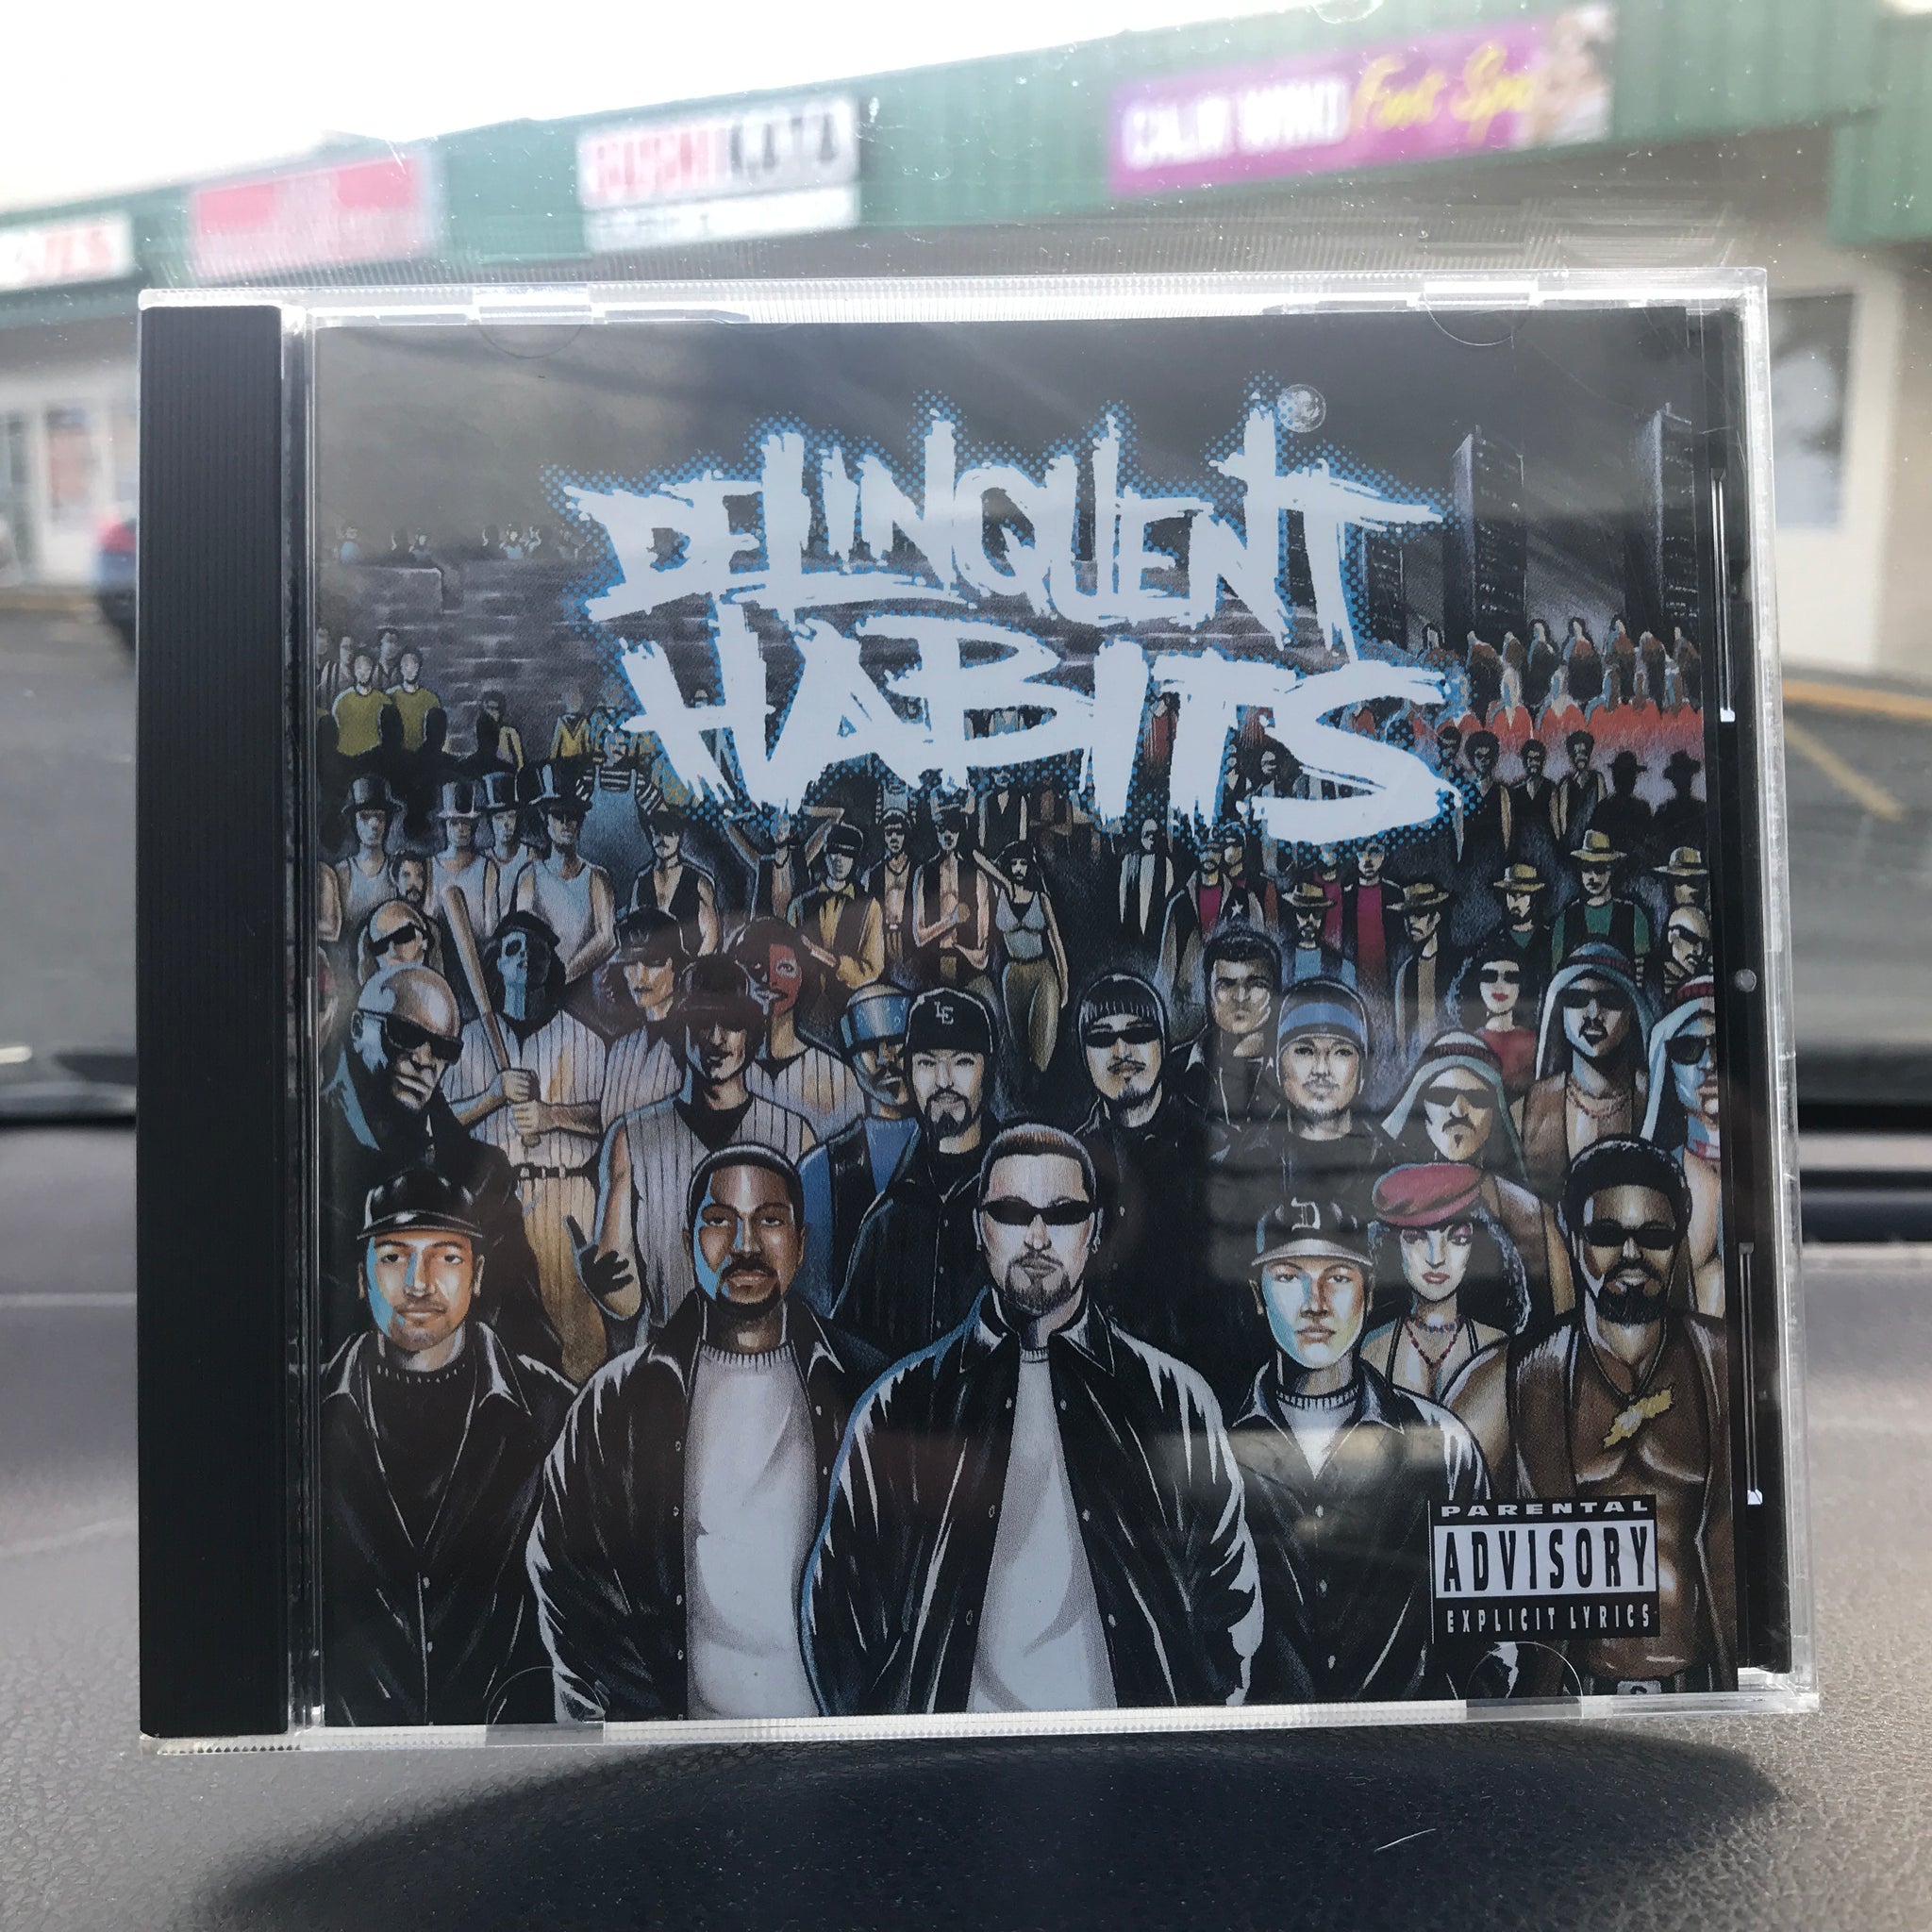 Delinquent Habits - S/T – Used CD